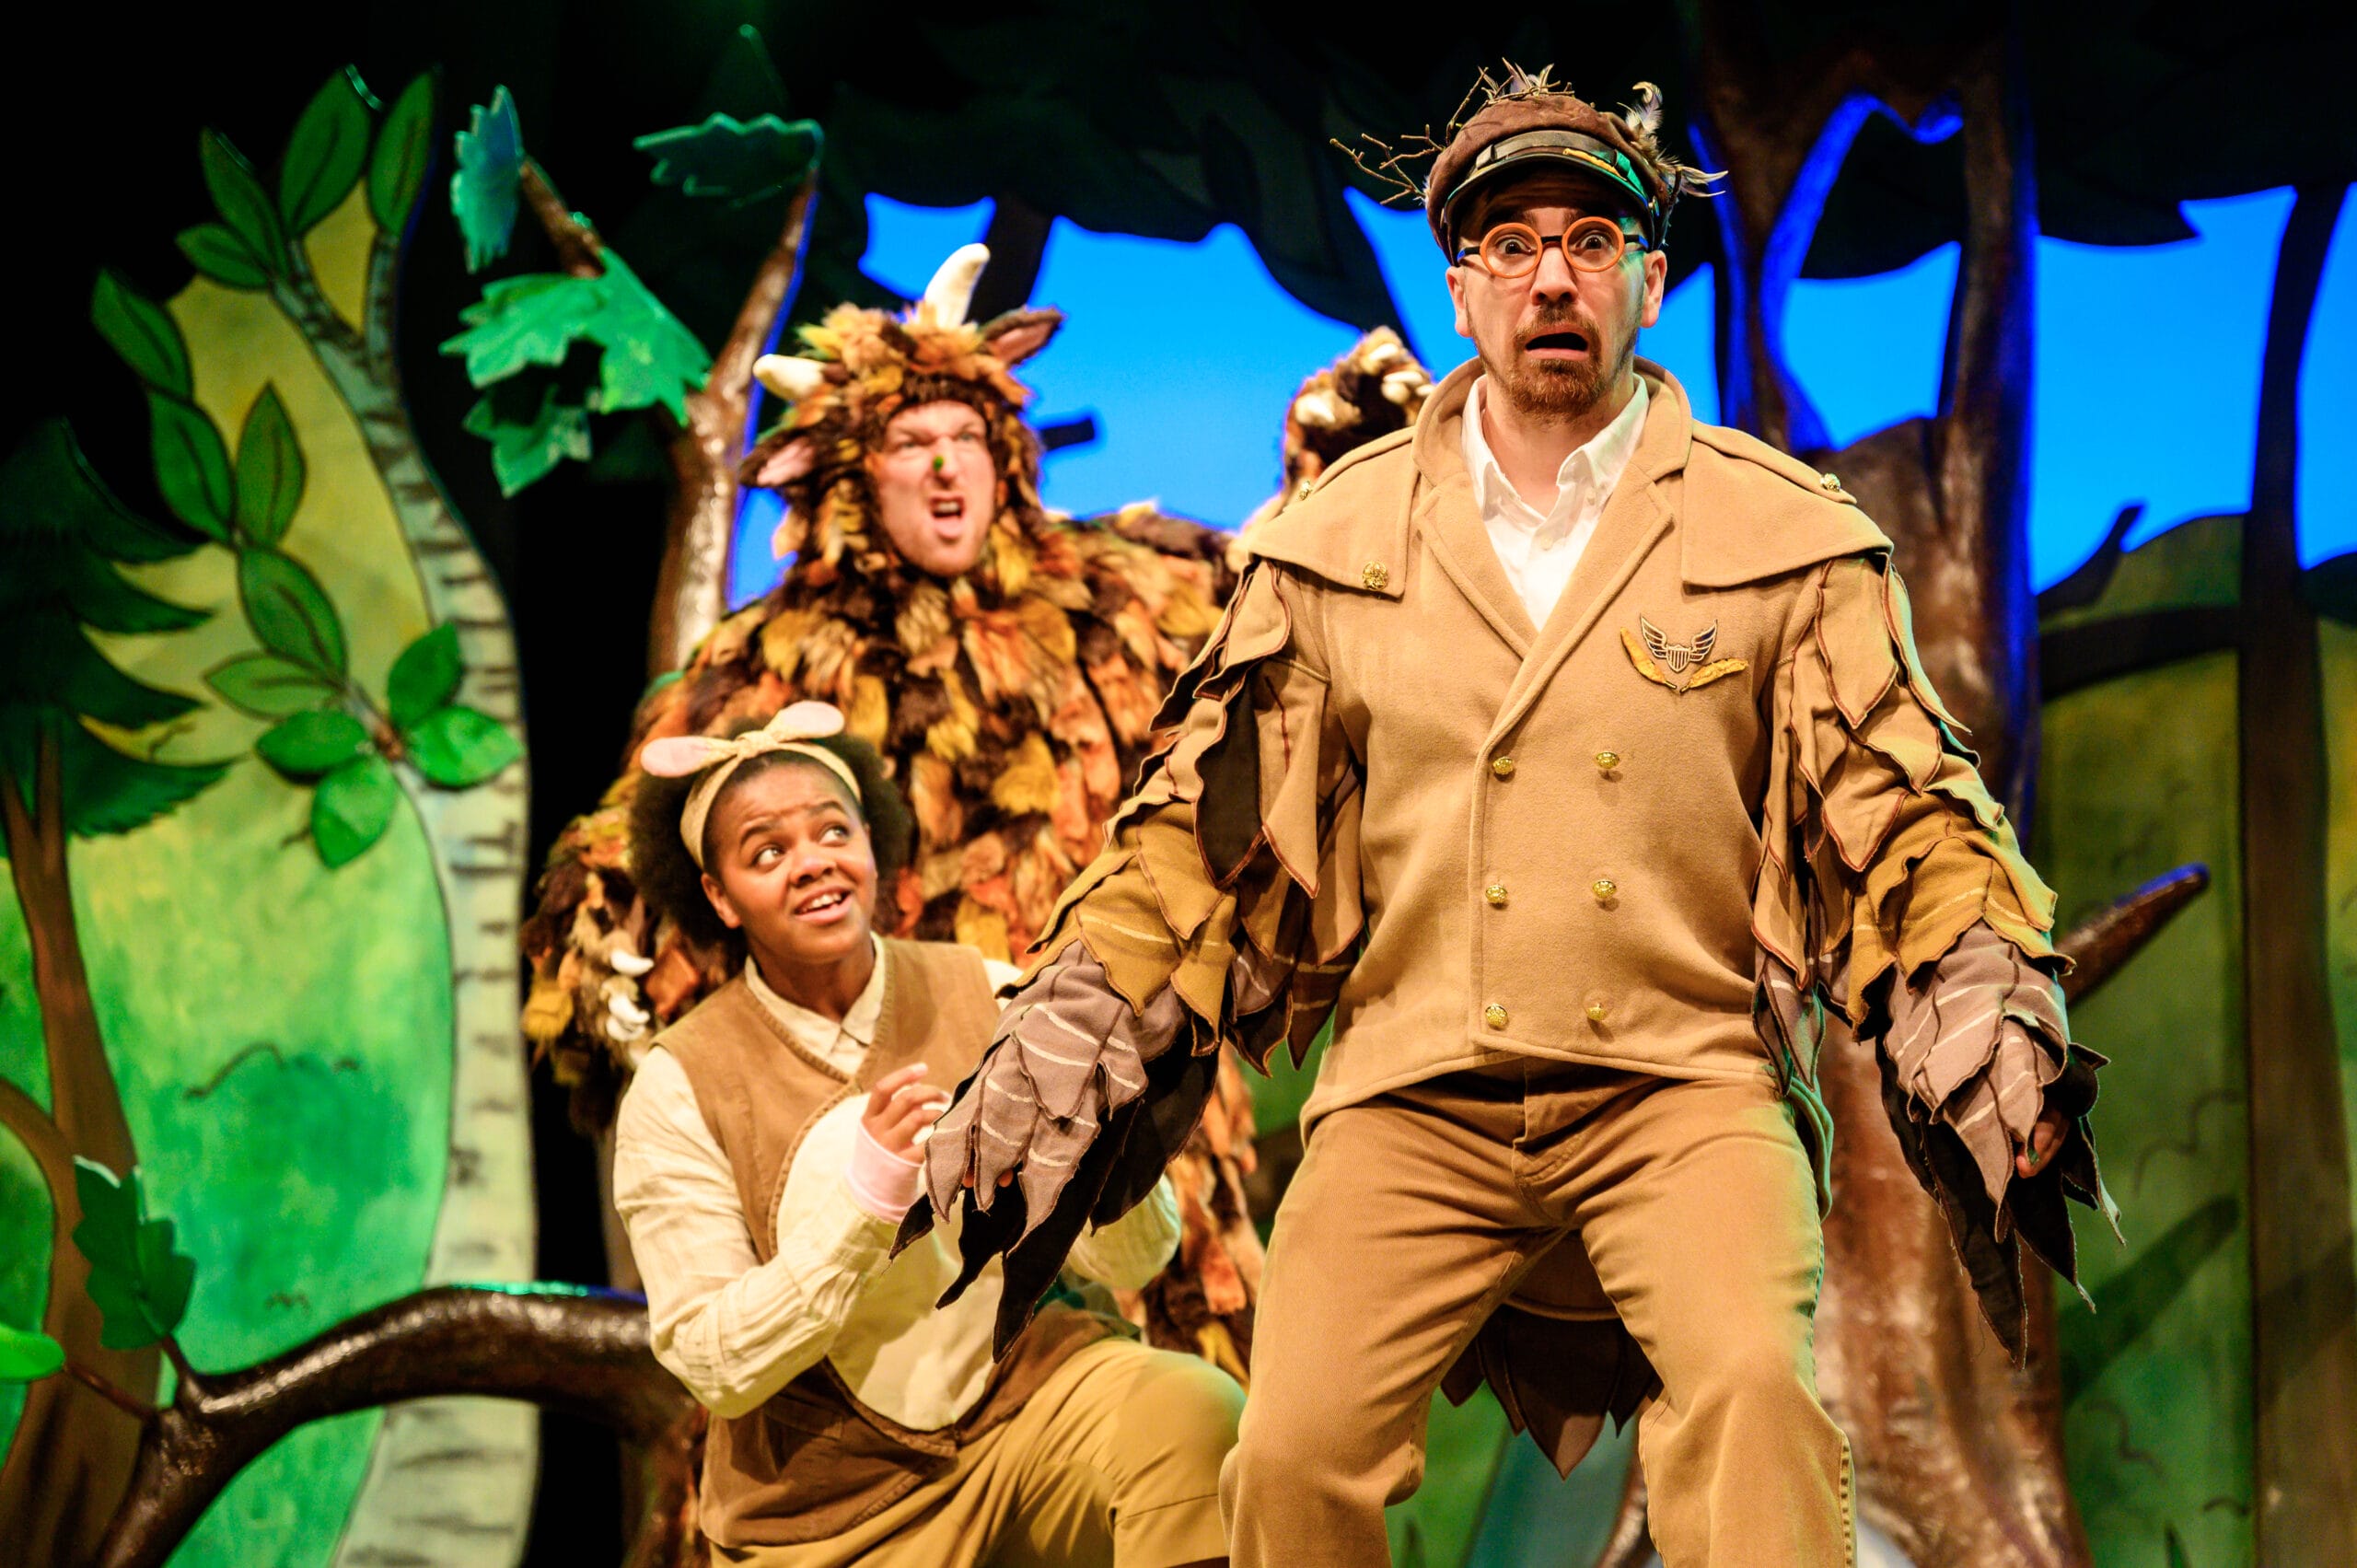 The Gruffalo and Mouse are on the left side of the stage, looking up at Owl! Owl wears a beige suit with large wings on both arms and circle spectacles. Behind the actors are leafy green trees.